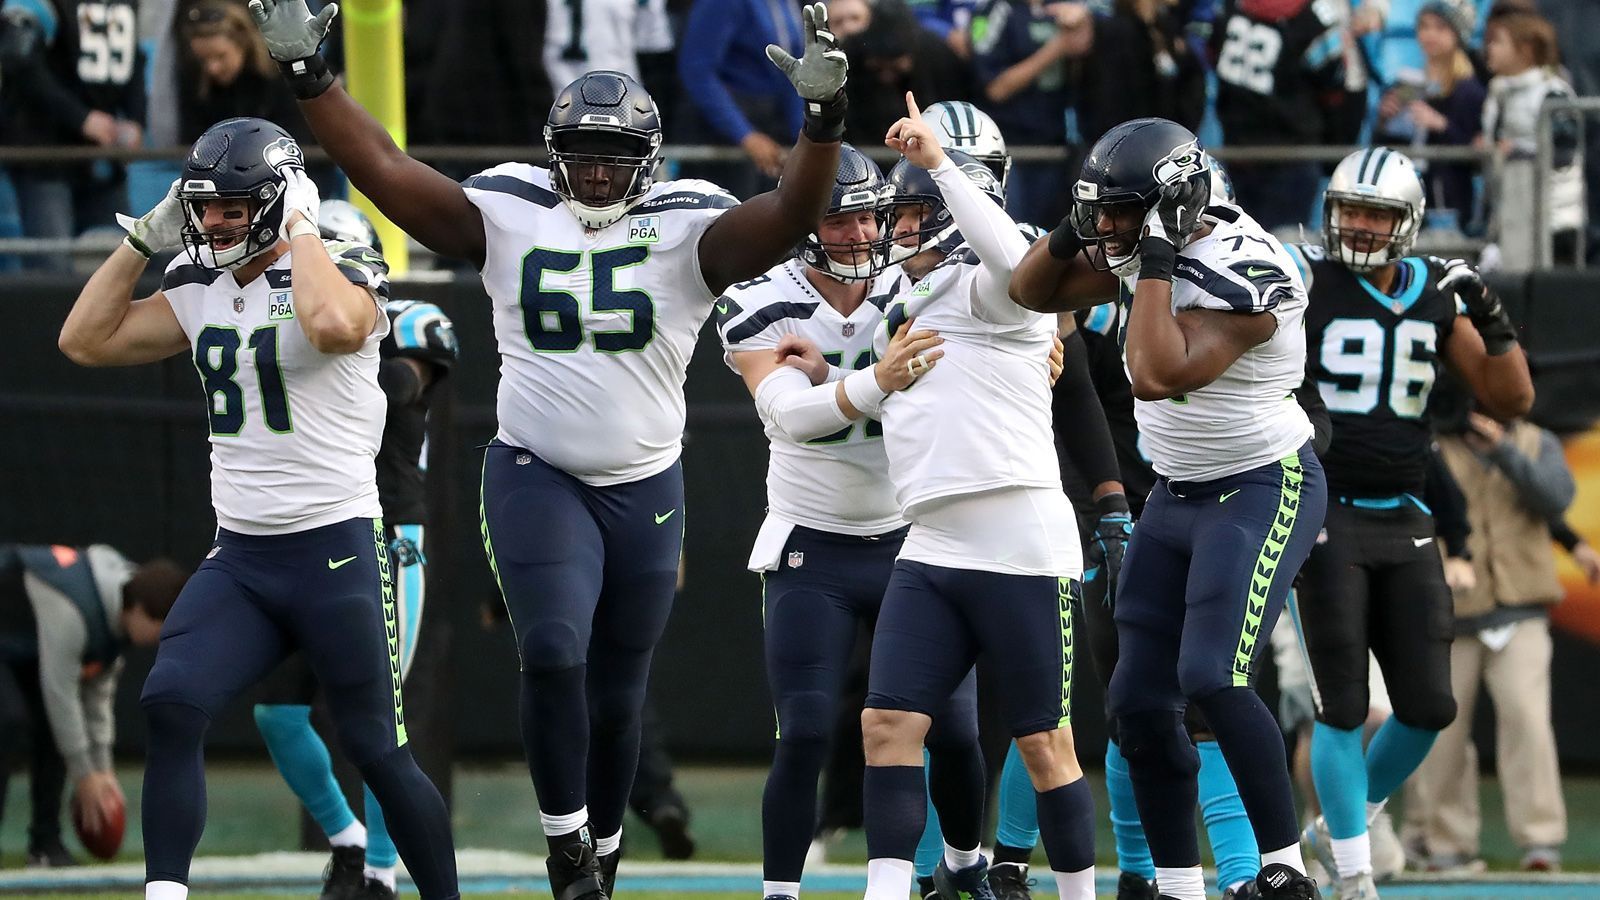 
                <strong>Seattle Seahawks (6-5)</strong><br>
                Week 13: vs. 49ers (2-9)Week 14: vs. Vikings (6-4-1)Week 15: at 49ers (2-9)Week 16: vs. Chiefs (9-2)Week 17: vs. Cardinals (2-9)
              